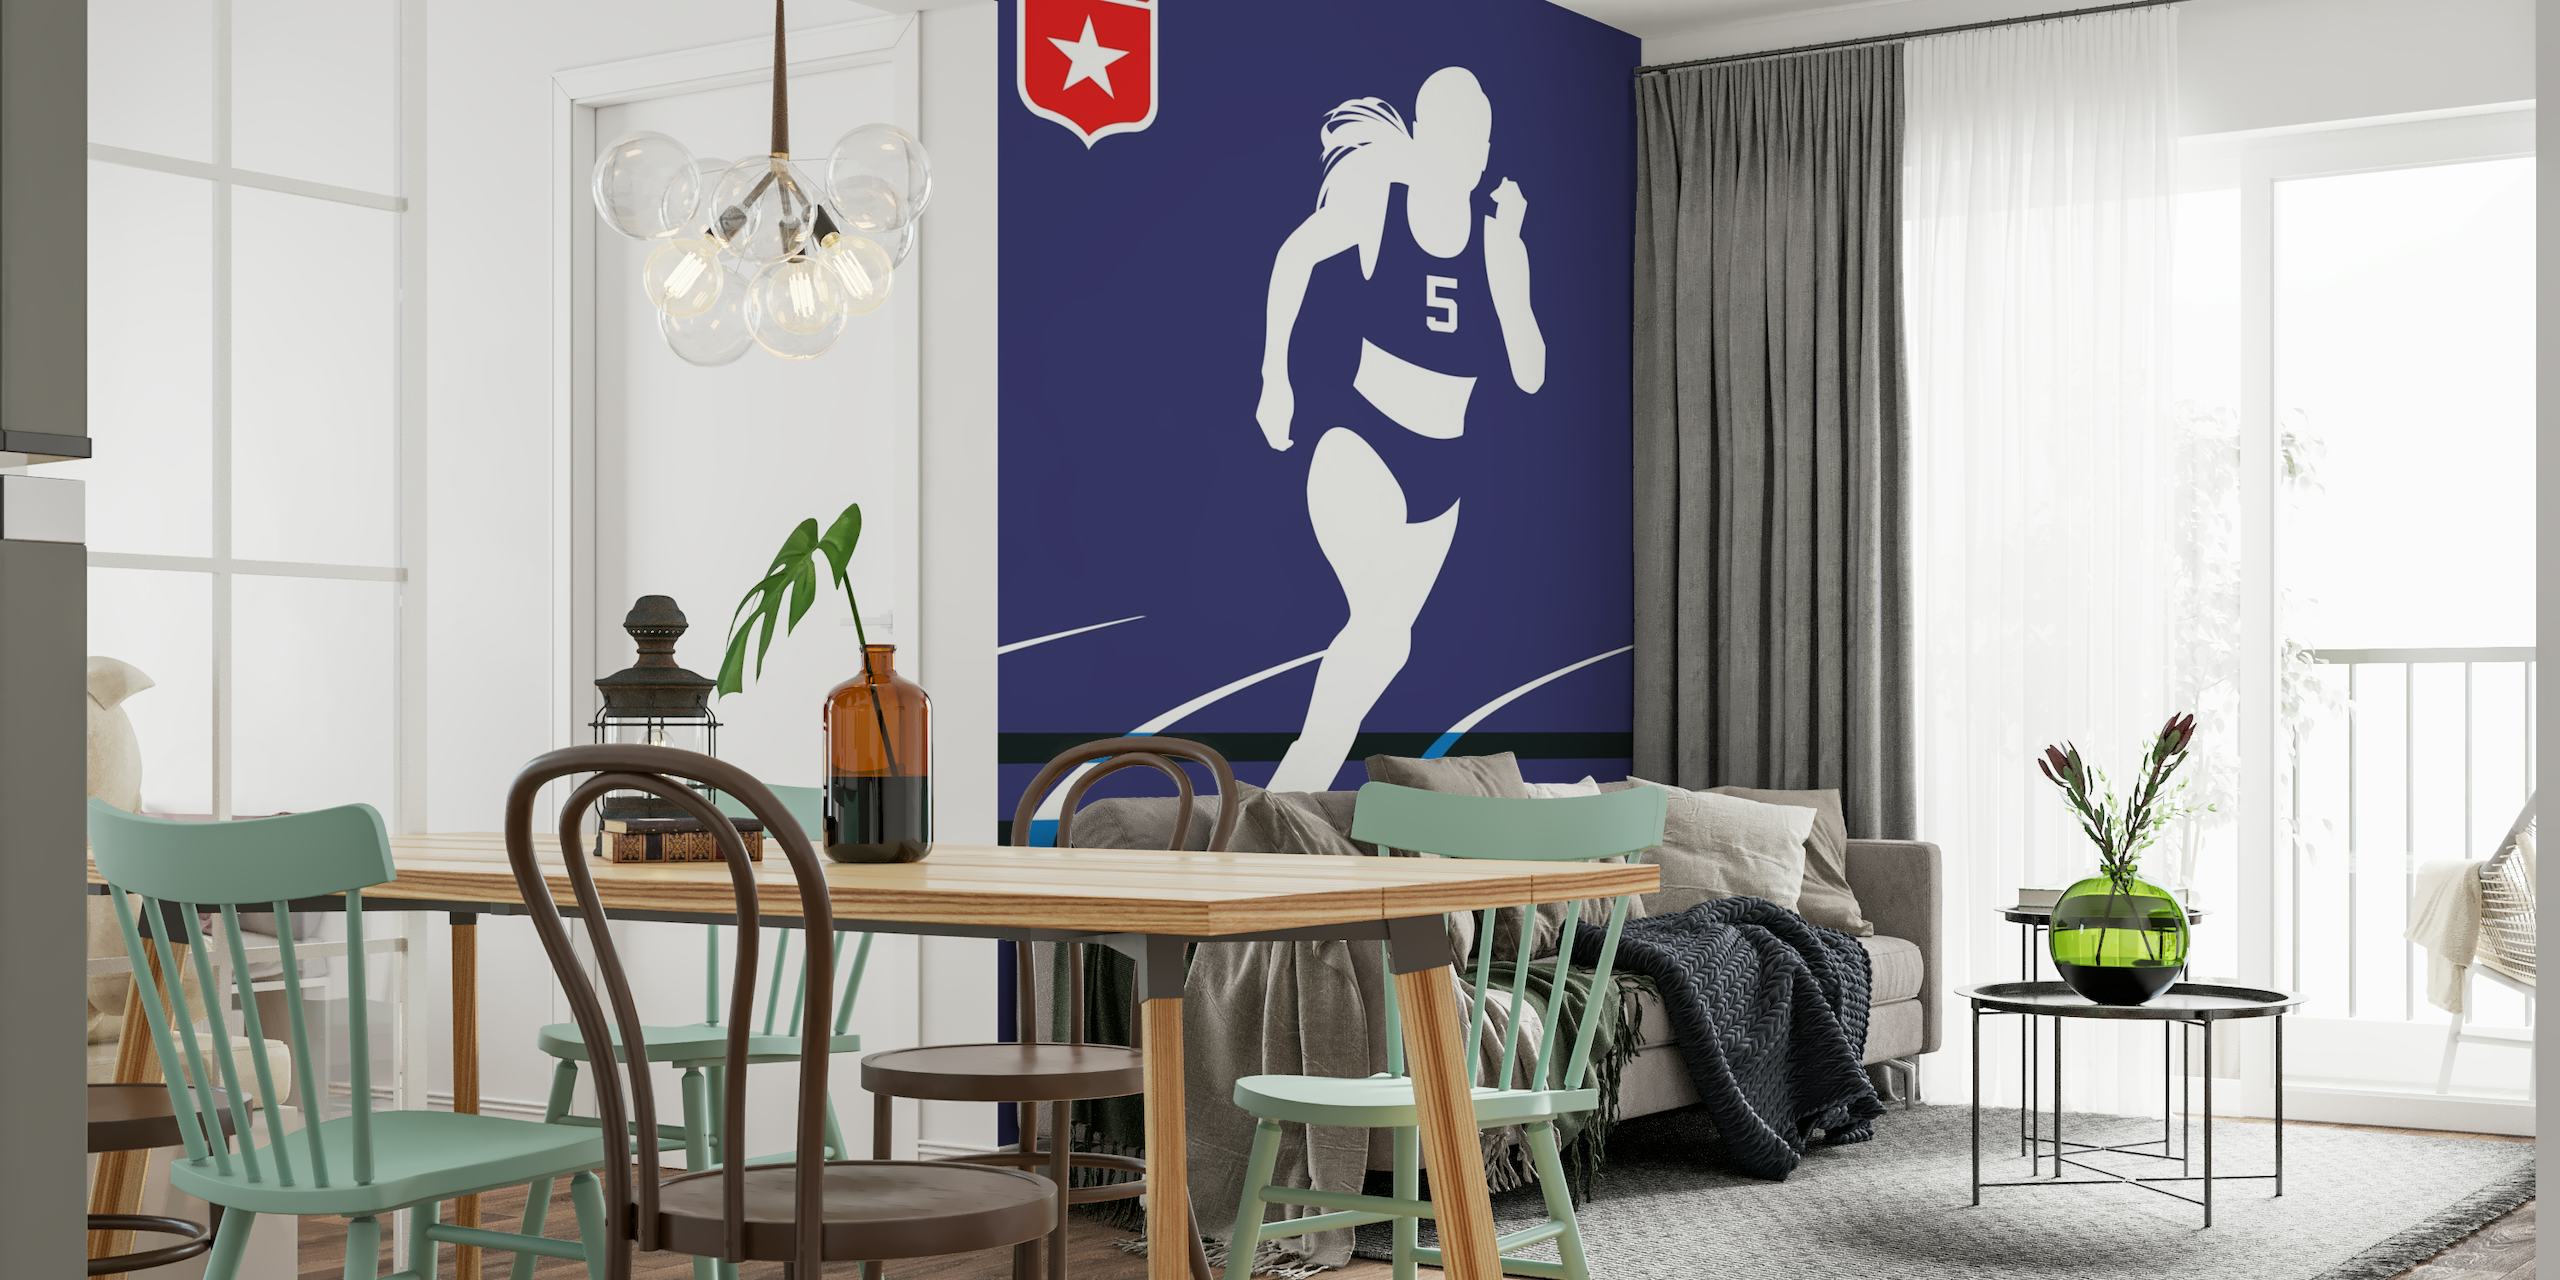 Wall mural of a runner in silhouette with track lines on a blue background